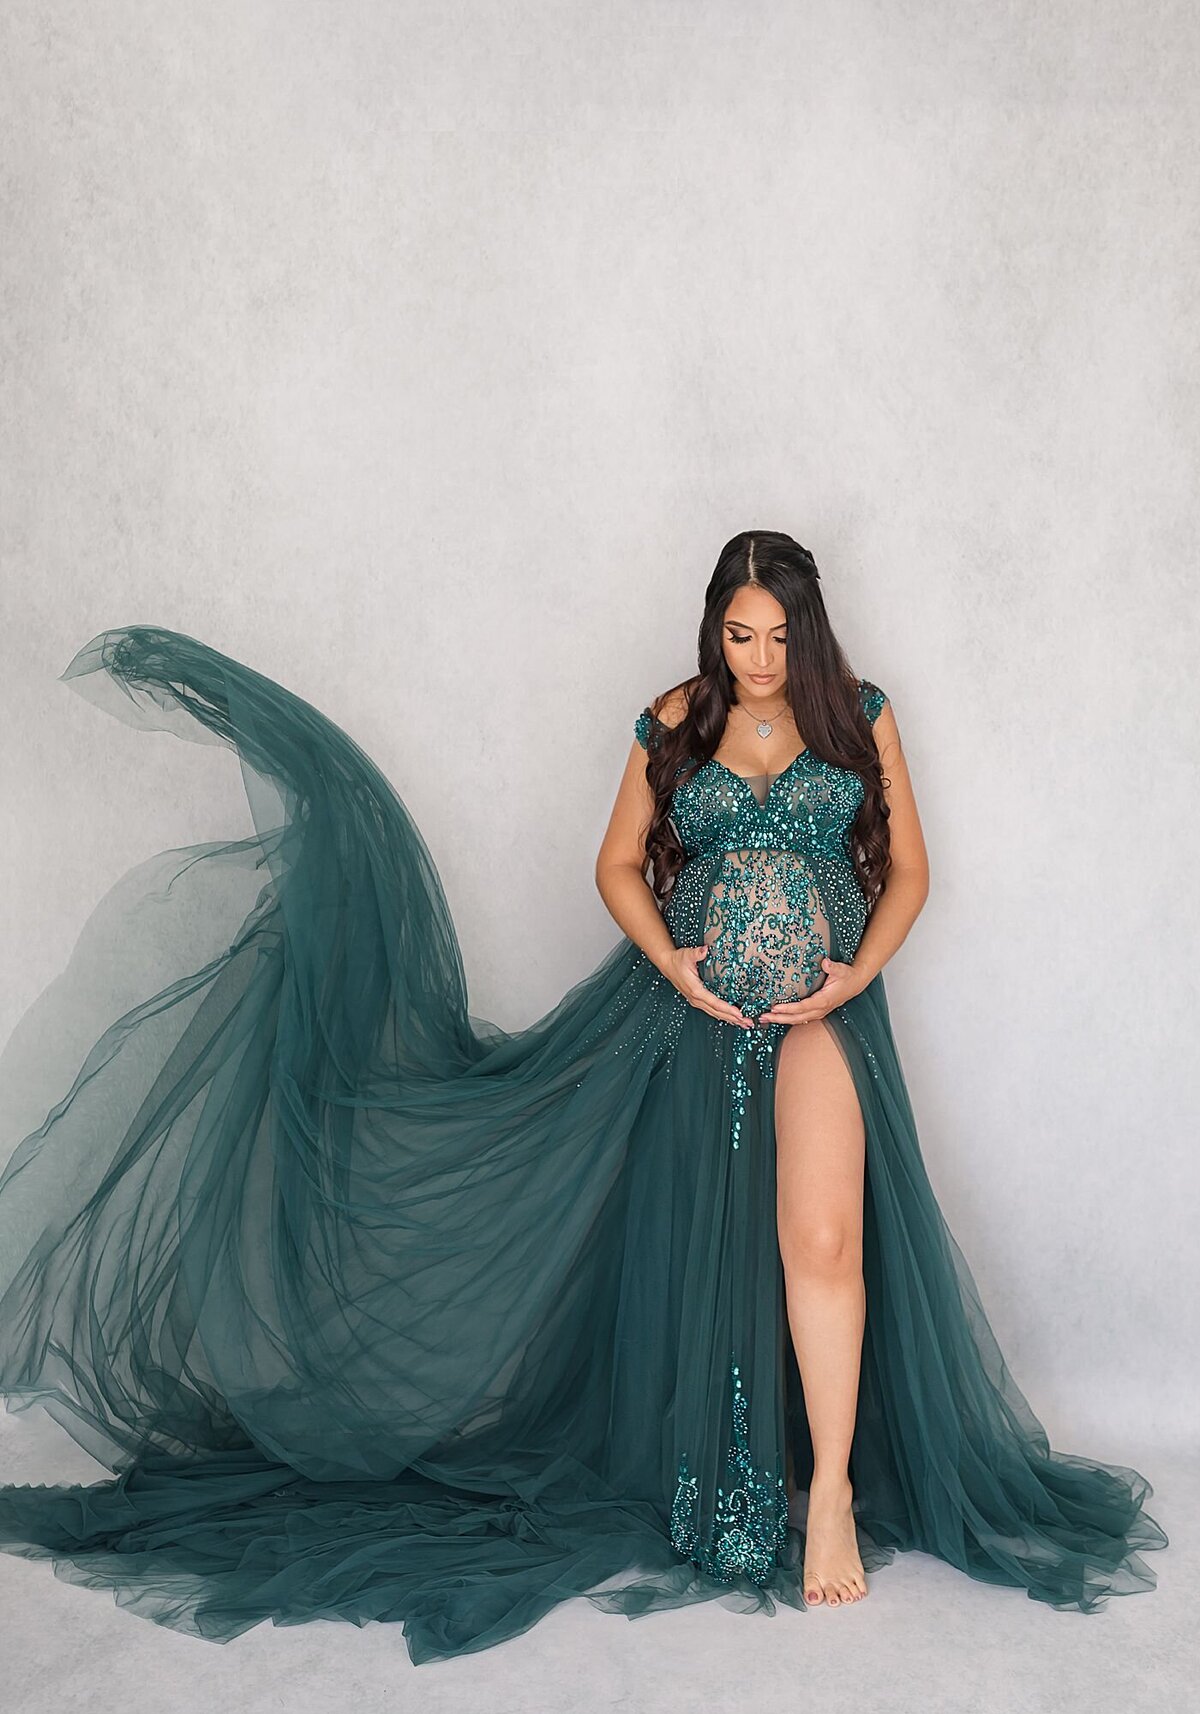 green maternity dress during orlando maternity photo session